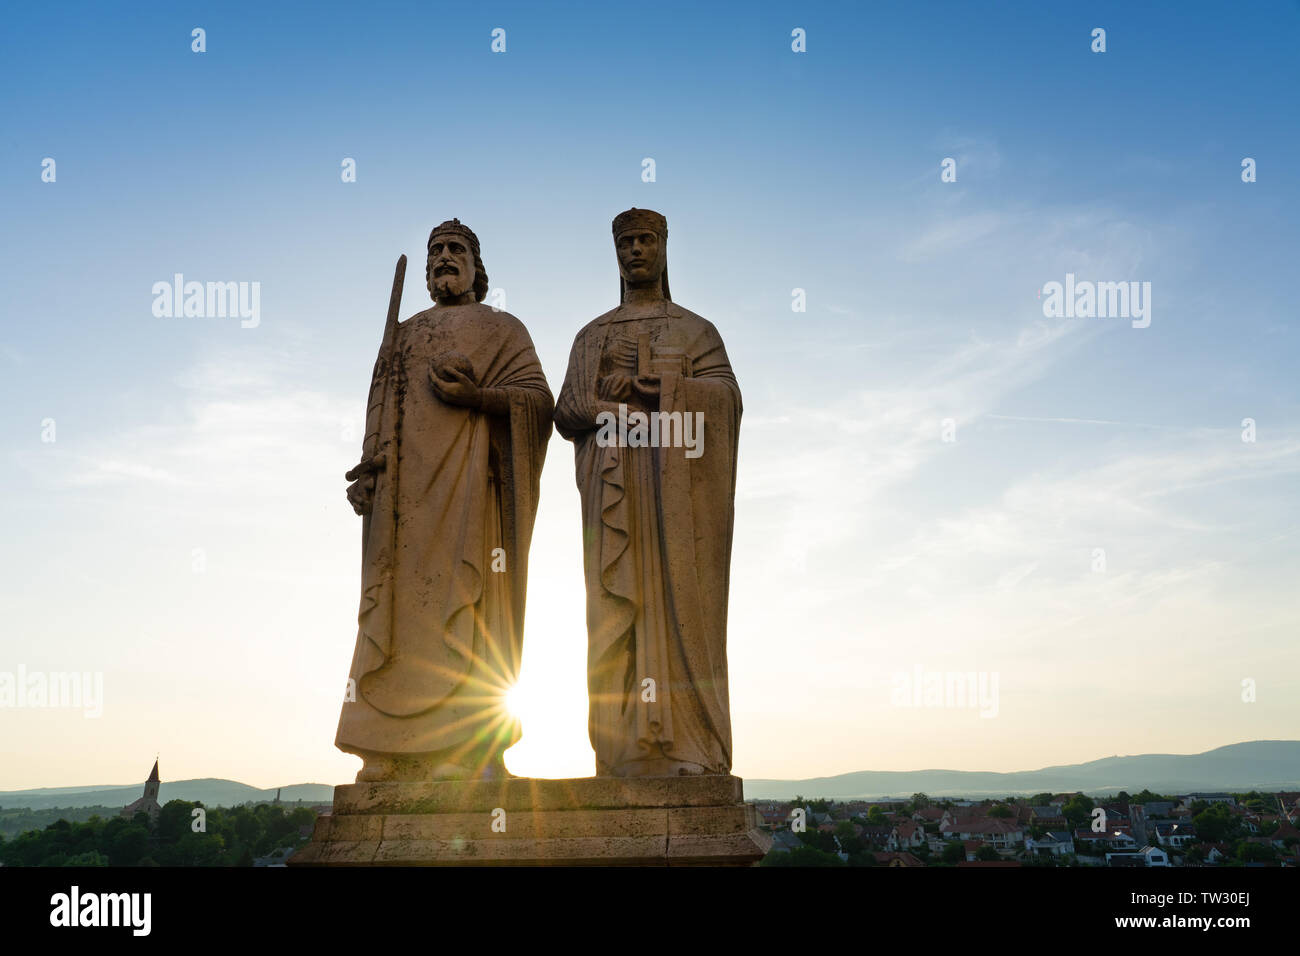 Statues of King Stephen I of Hungary and his wife Gisela over the Castle Hill of Veszprem town Stock Photo